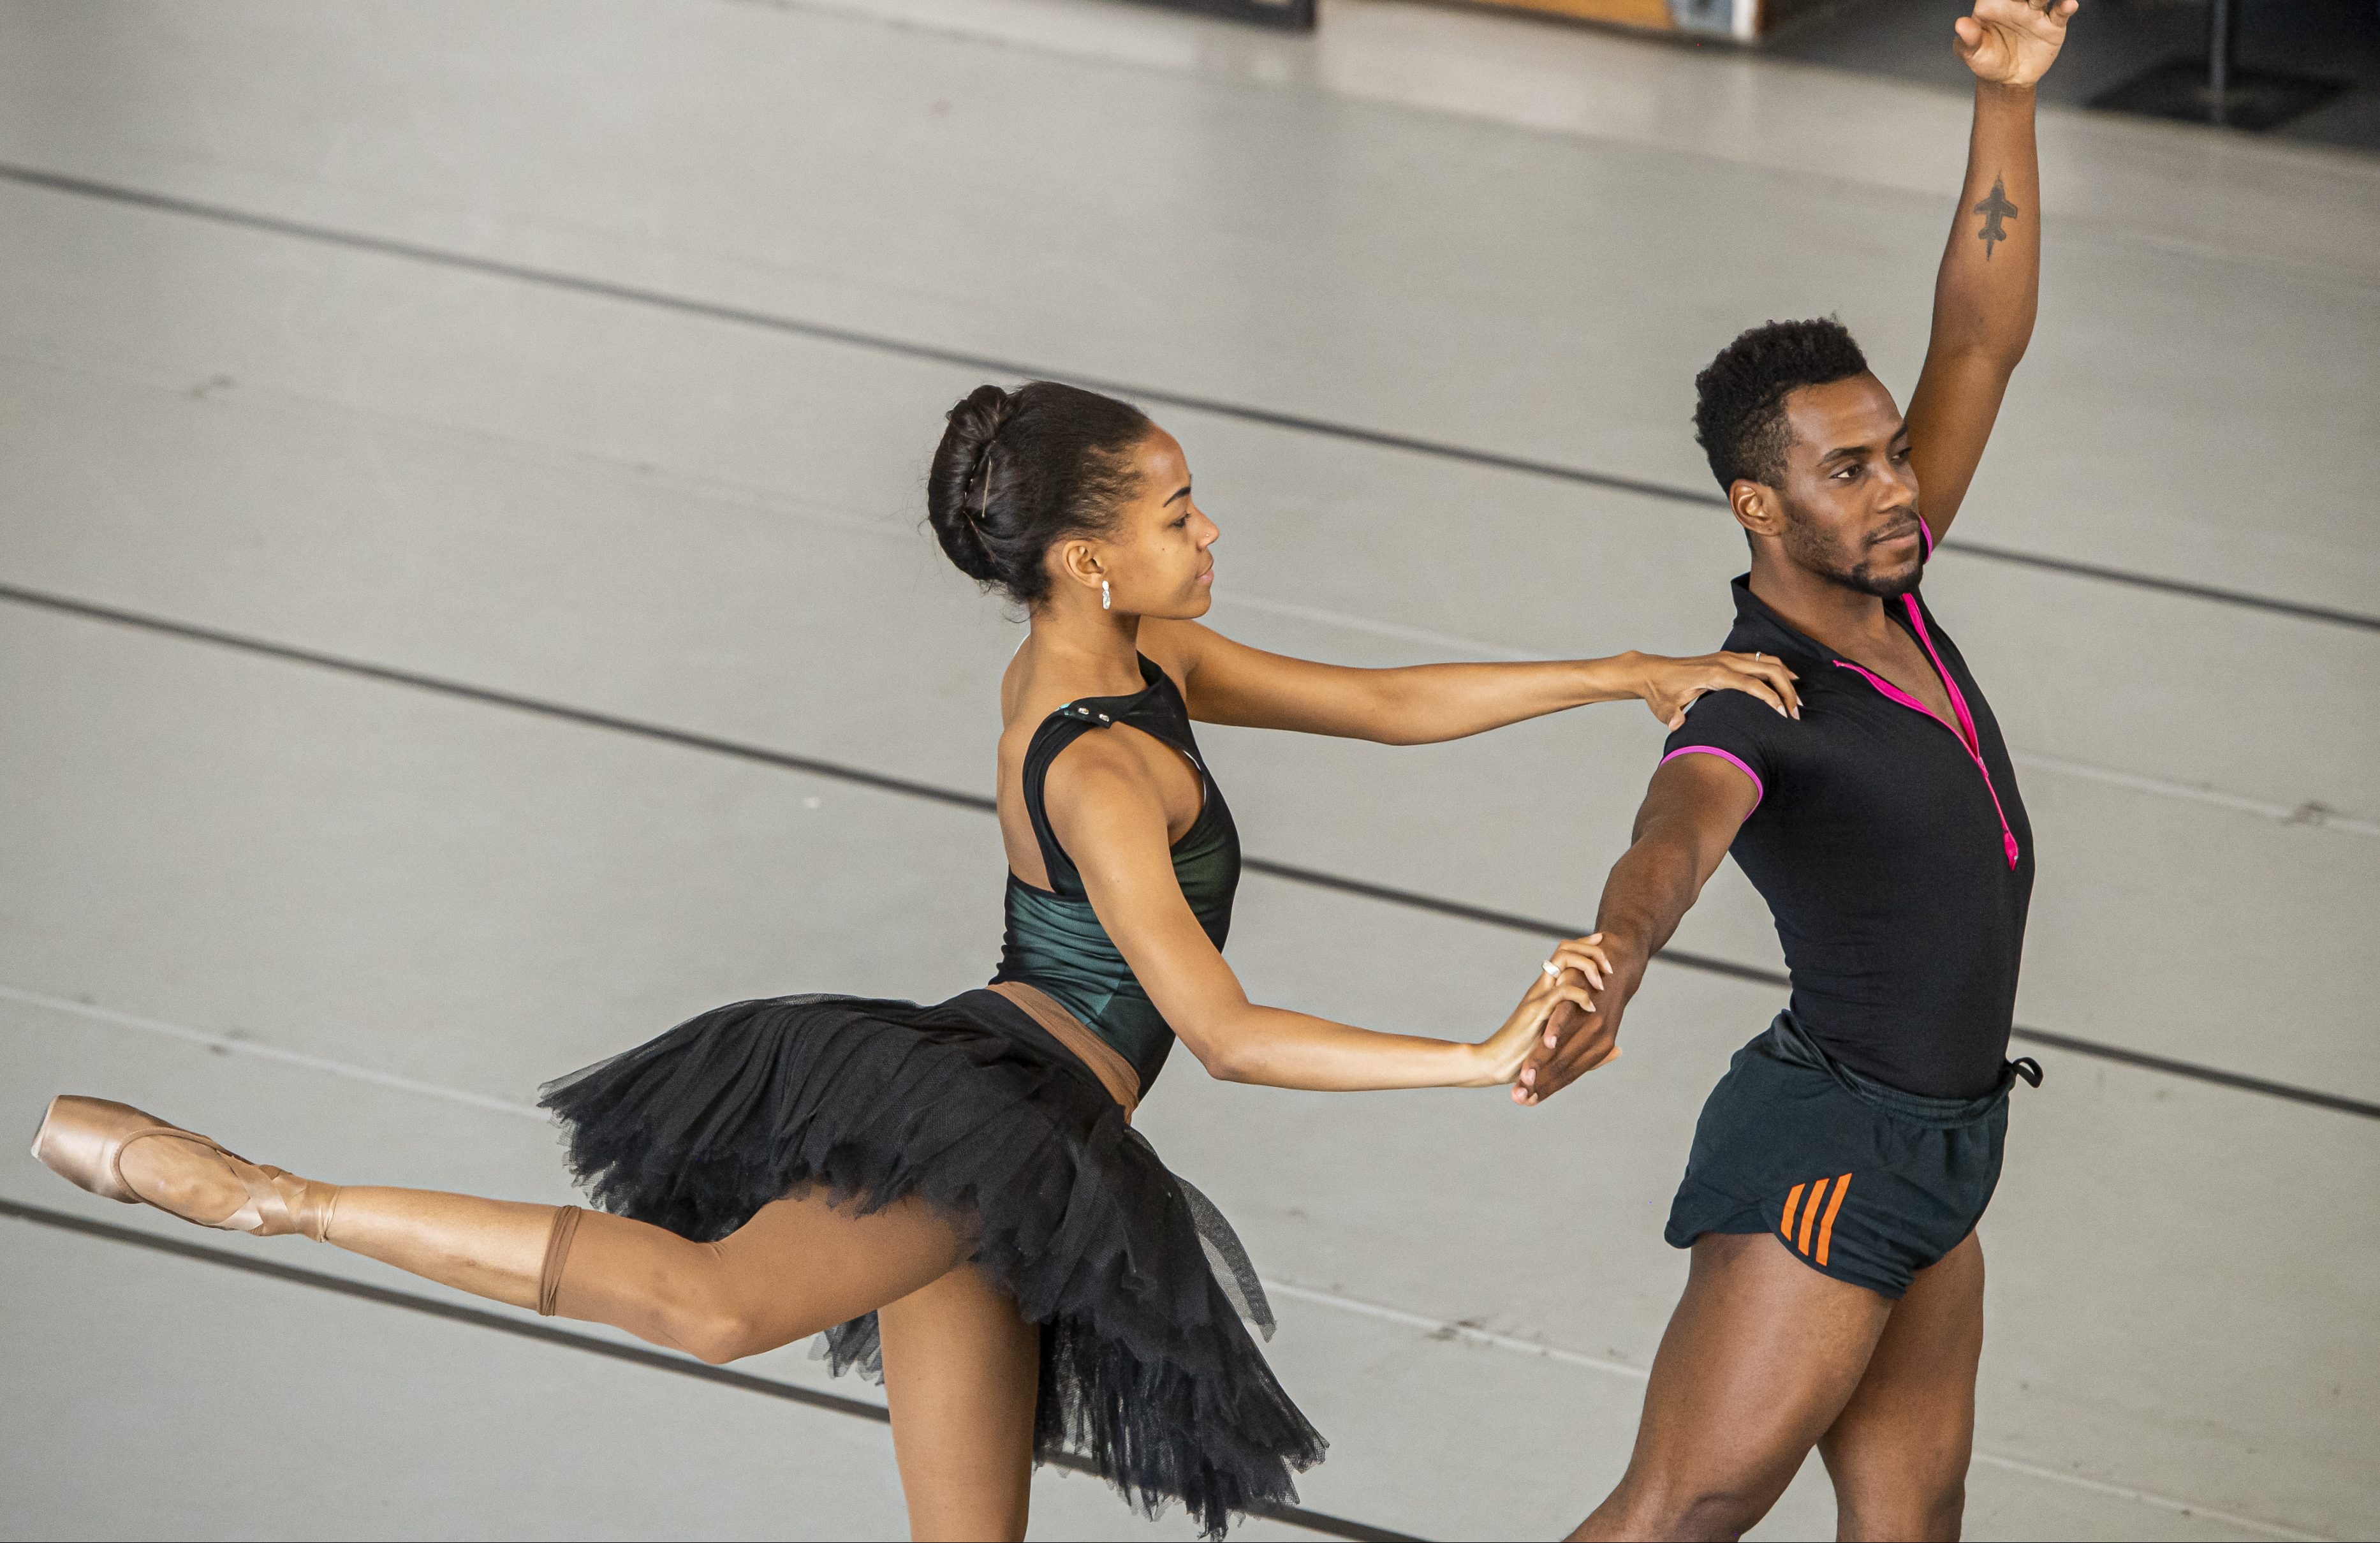 Dancers from The Nutcracker Production rehearse at Joburg Ballet Studio